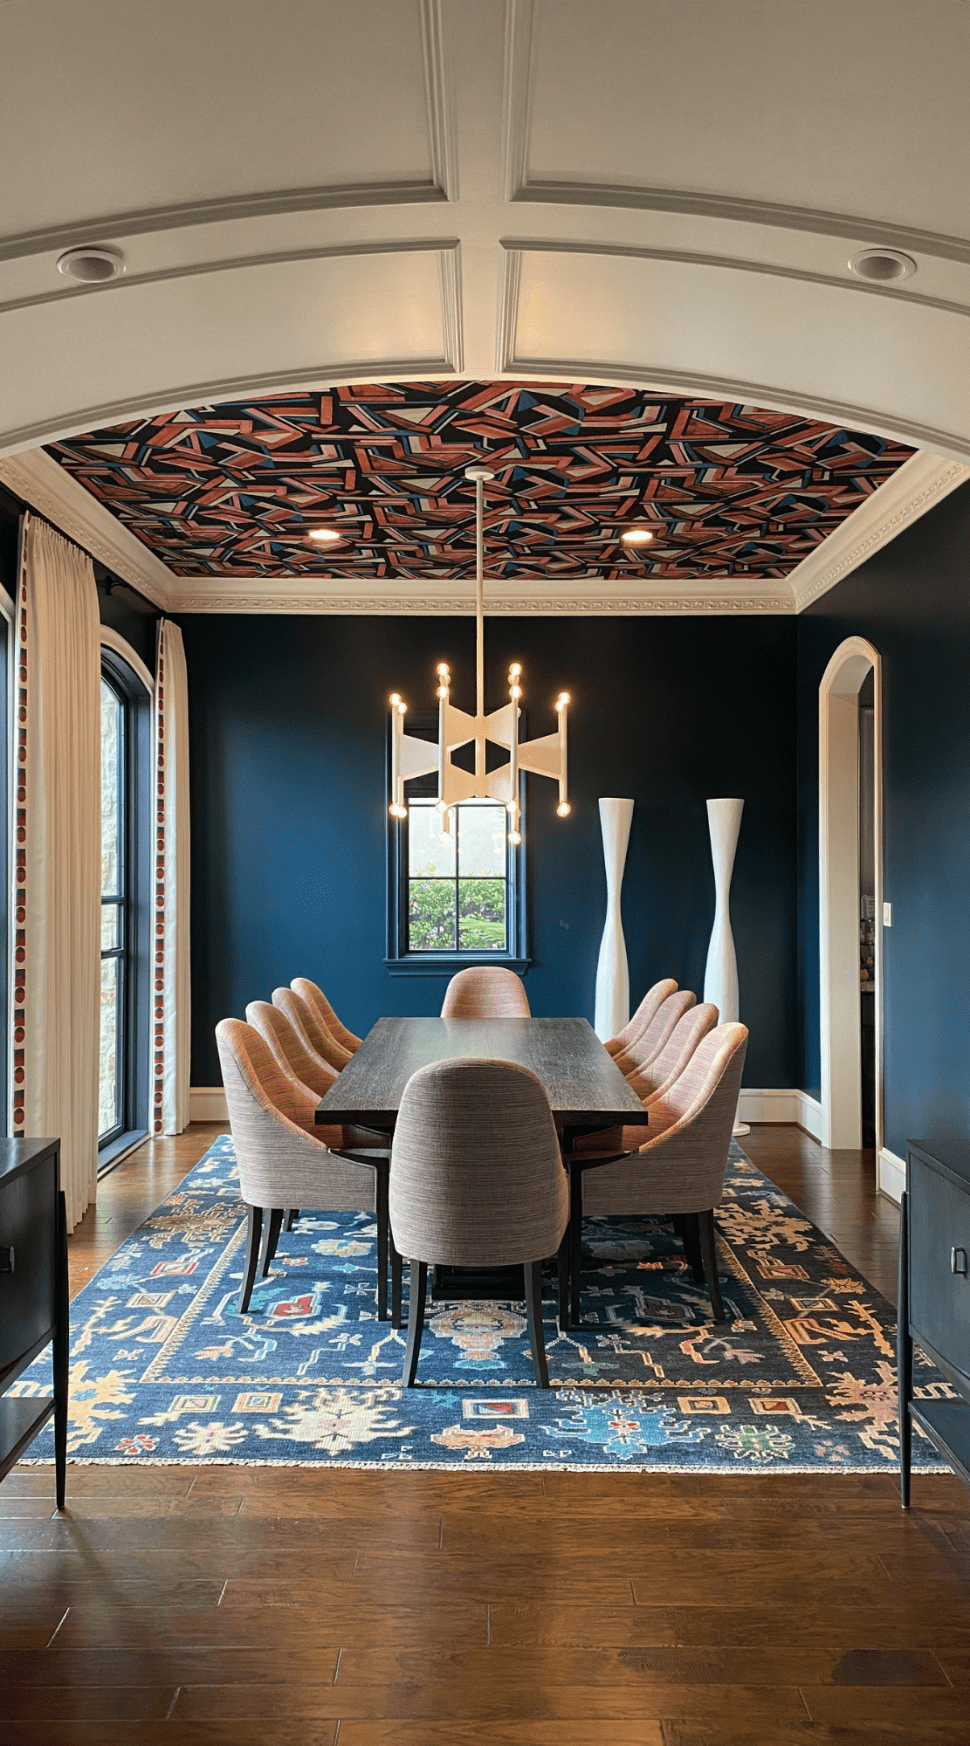 The ceiling of the Timberloch dining room ties in perfectly with the rug.